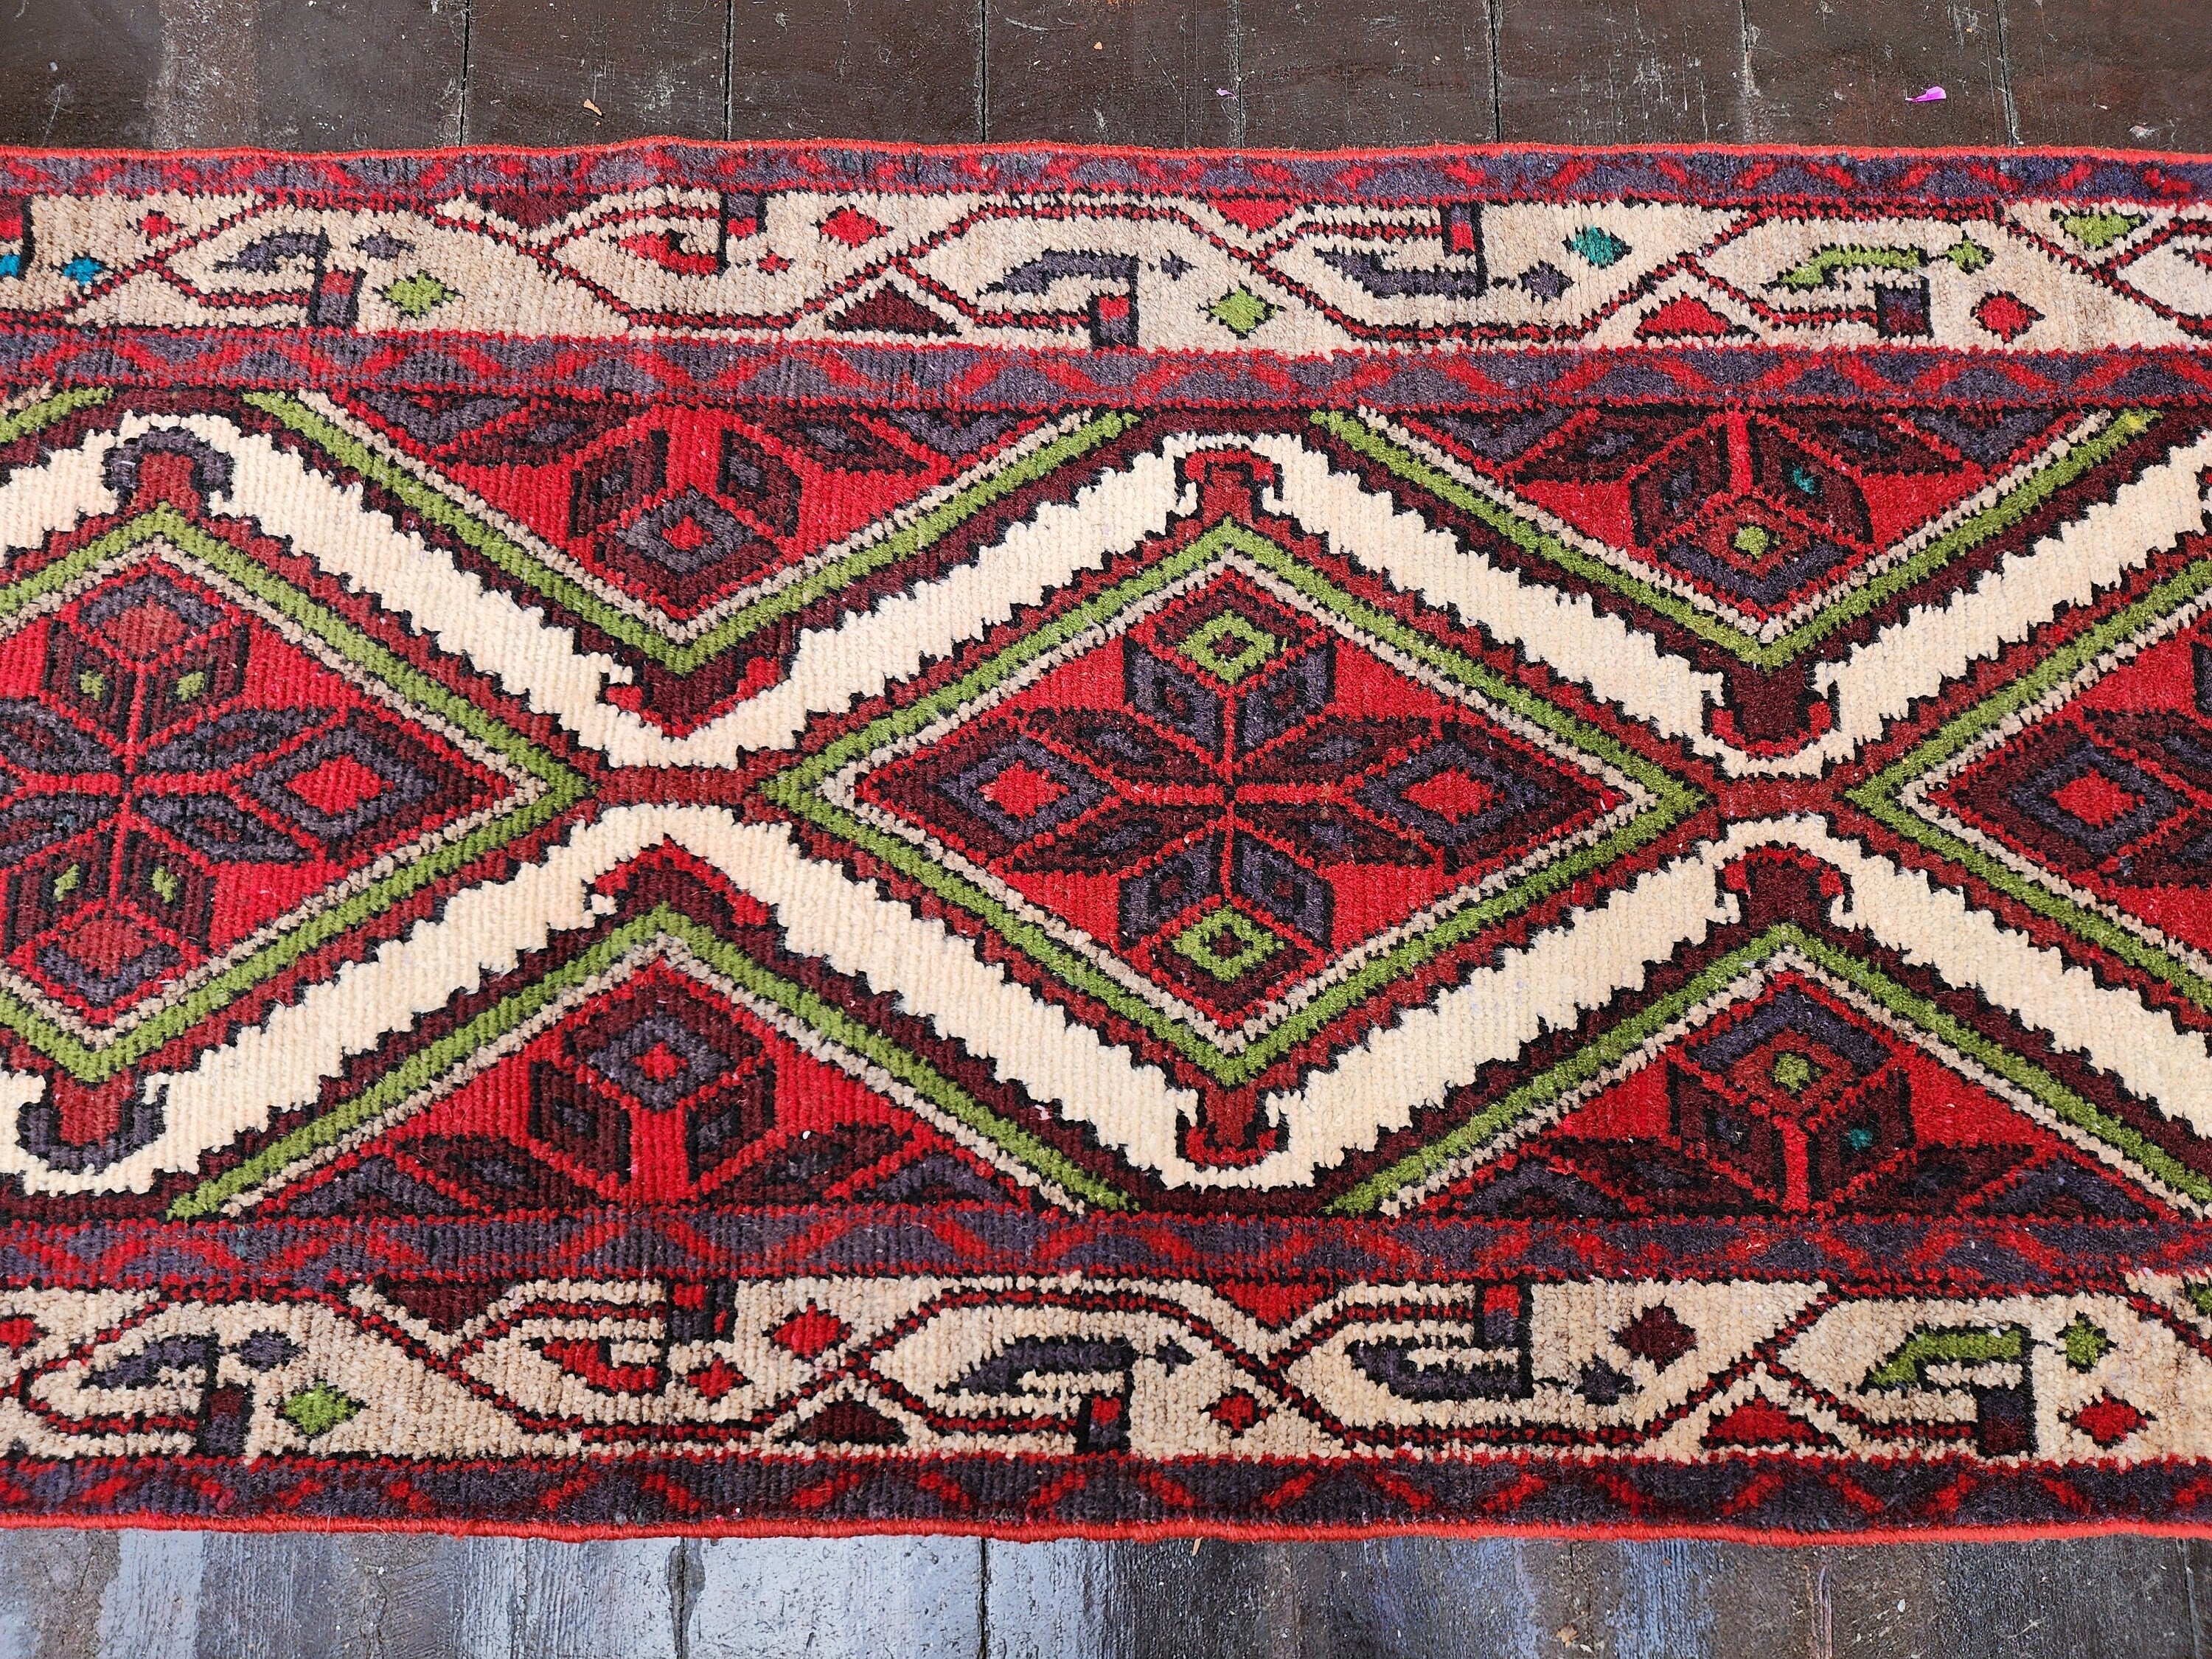 Persian Hallway Long Runner Rug 8 x 2 ft Red White Green Vintage Turkish Natural Wool Recycled  Rug, Boho Rustic Decor Antique Entryway Rug